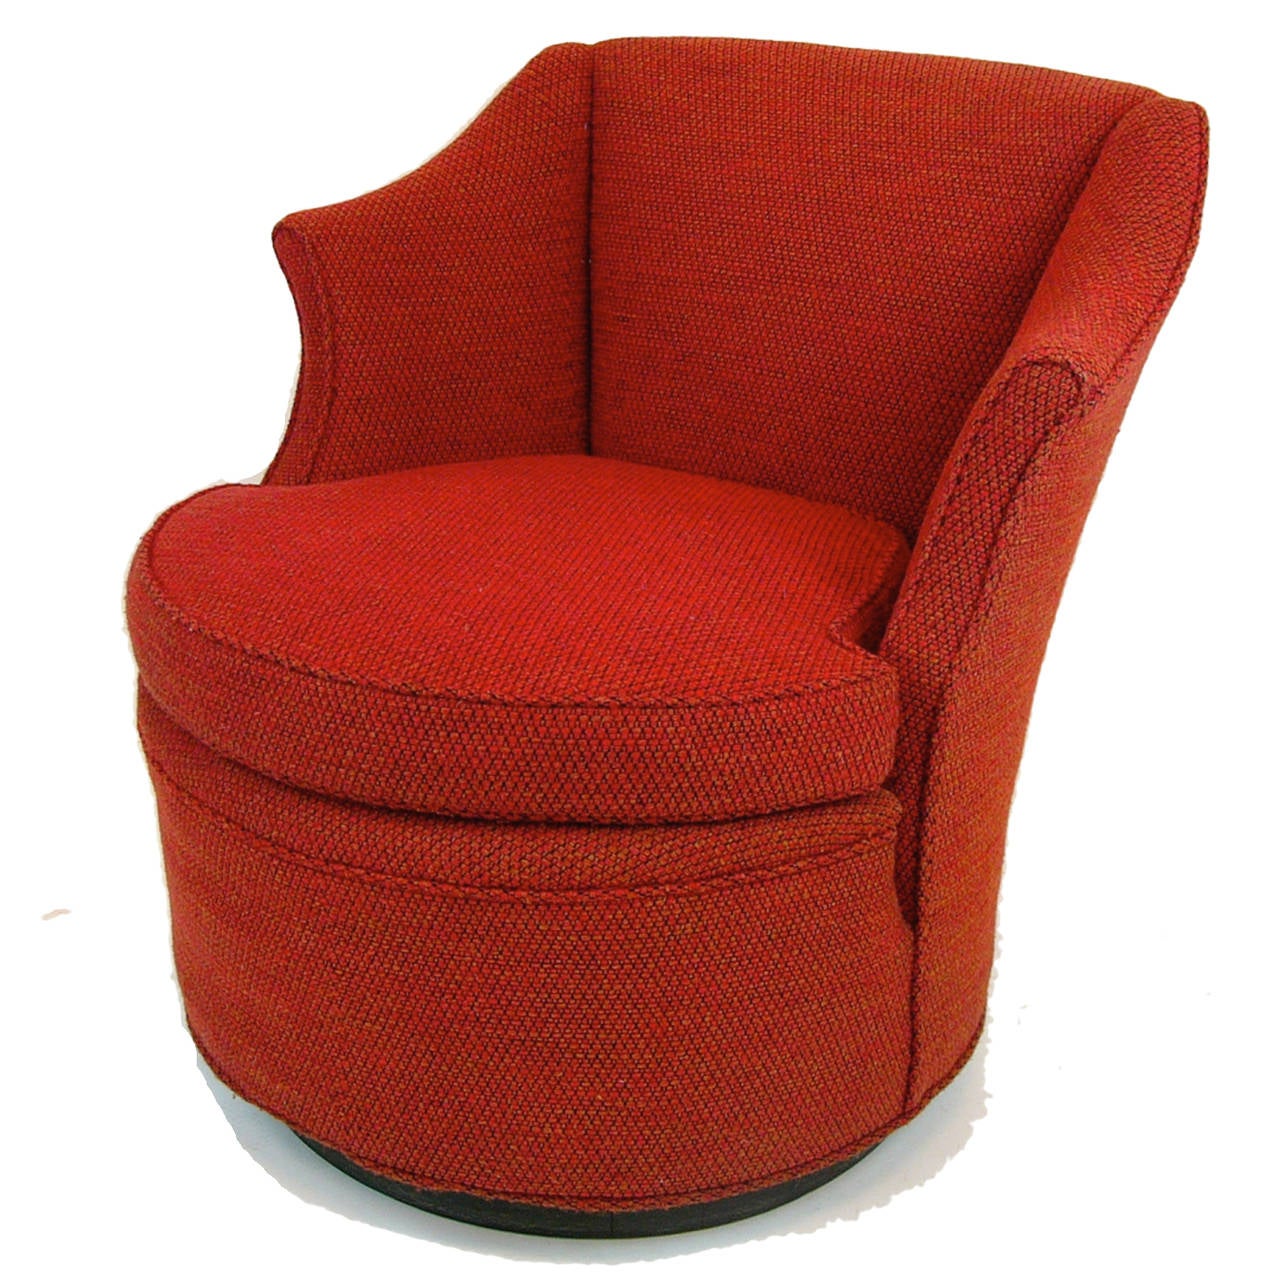 American Pair of Red Swivel Chairs Attributed to Edward Wormley for Dunbar Furniture